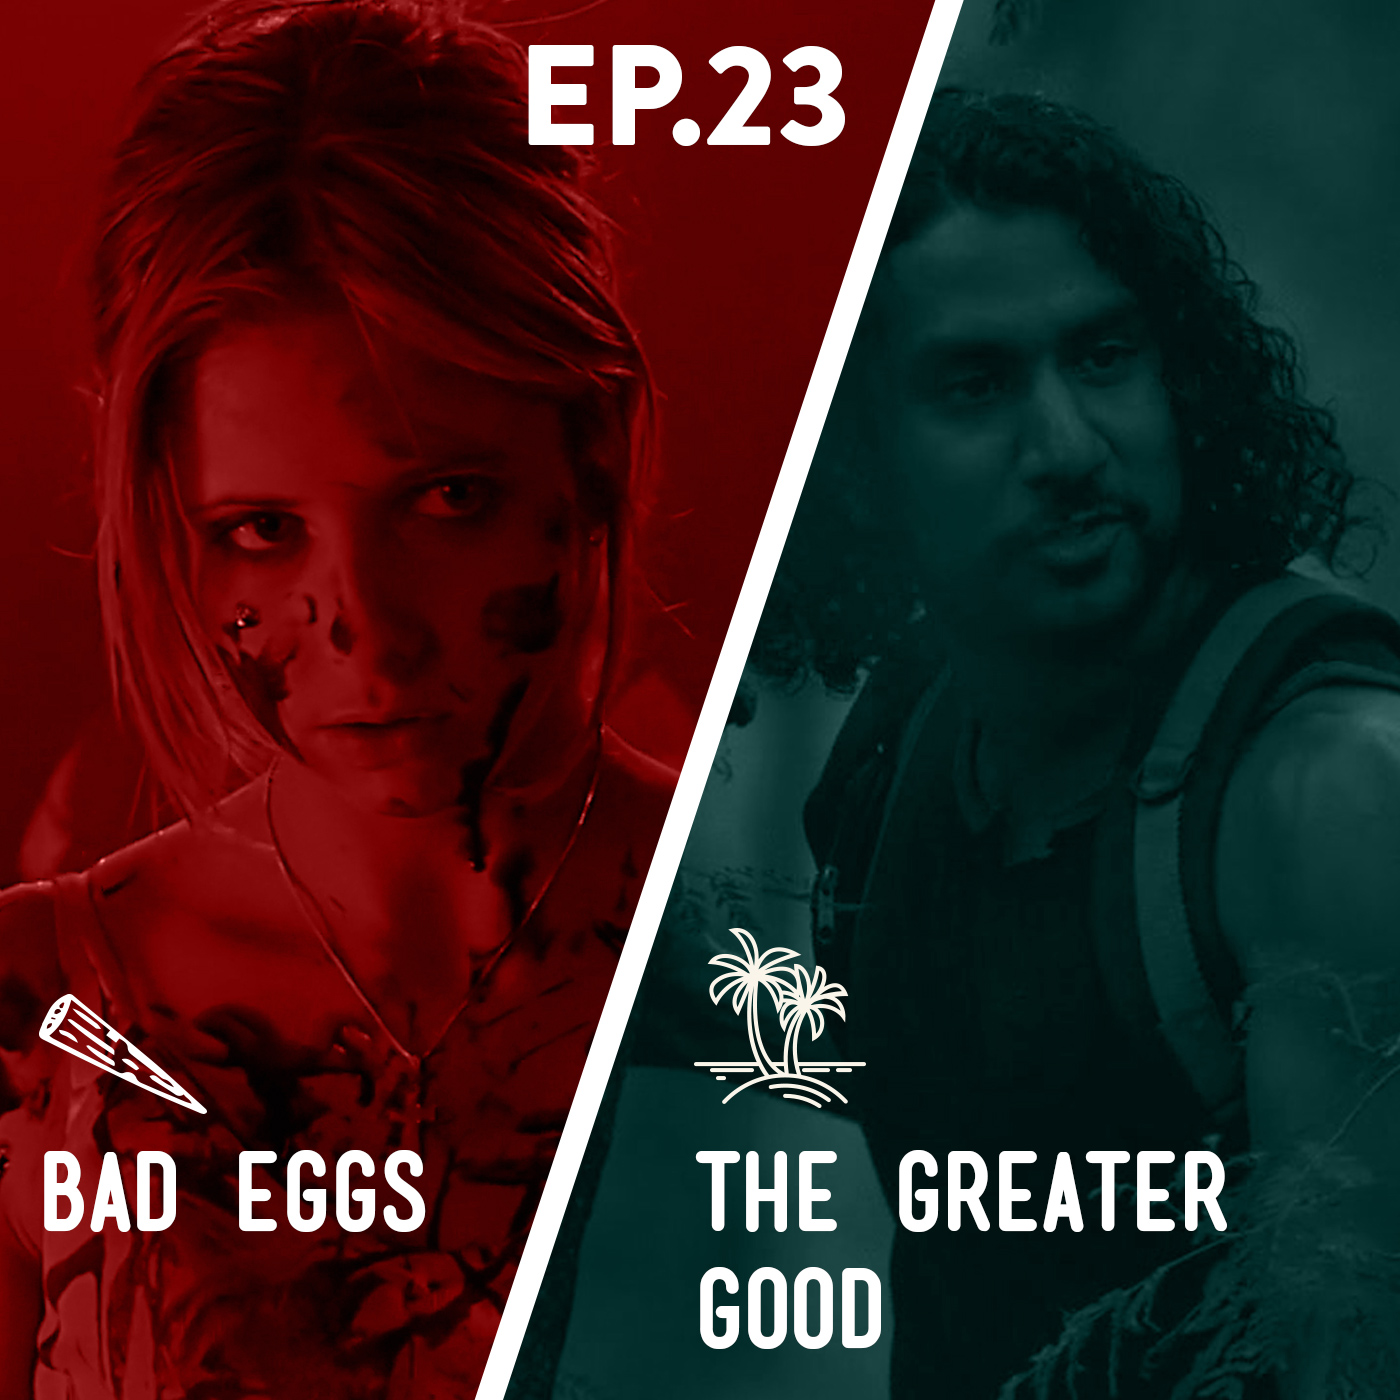 23 - Bad Eggs / The Greater Good